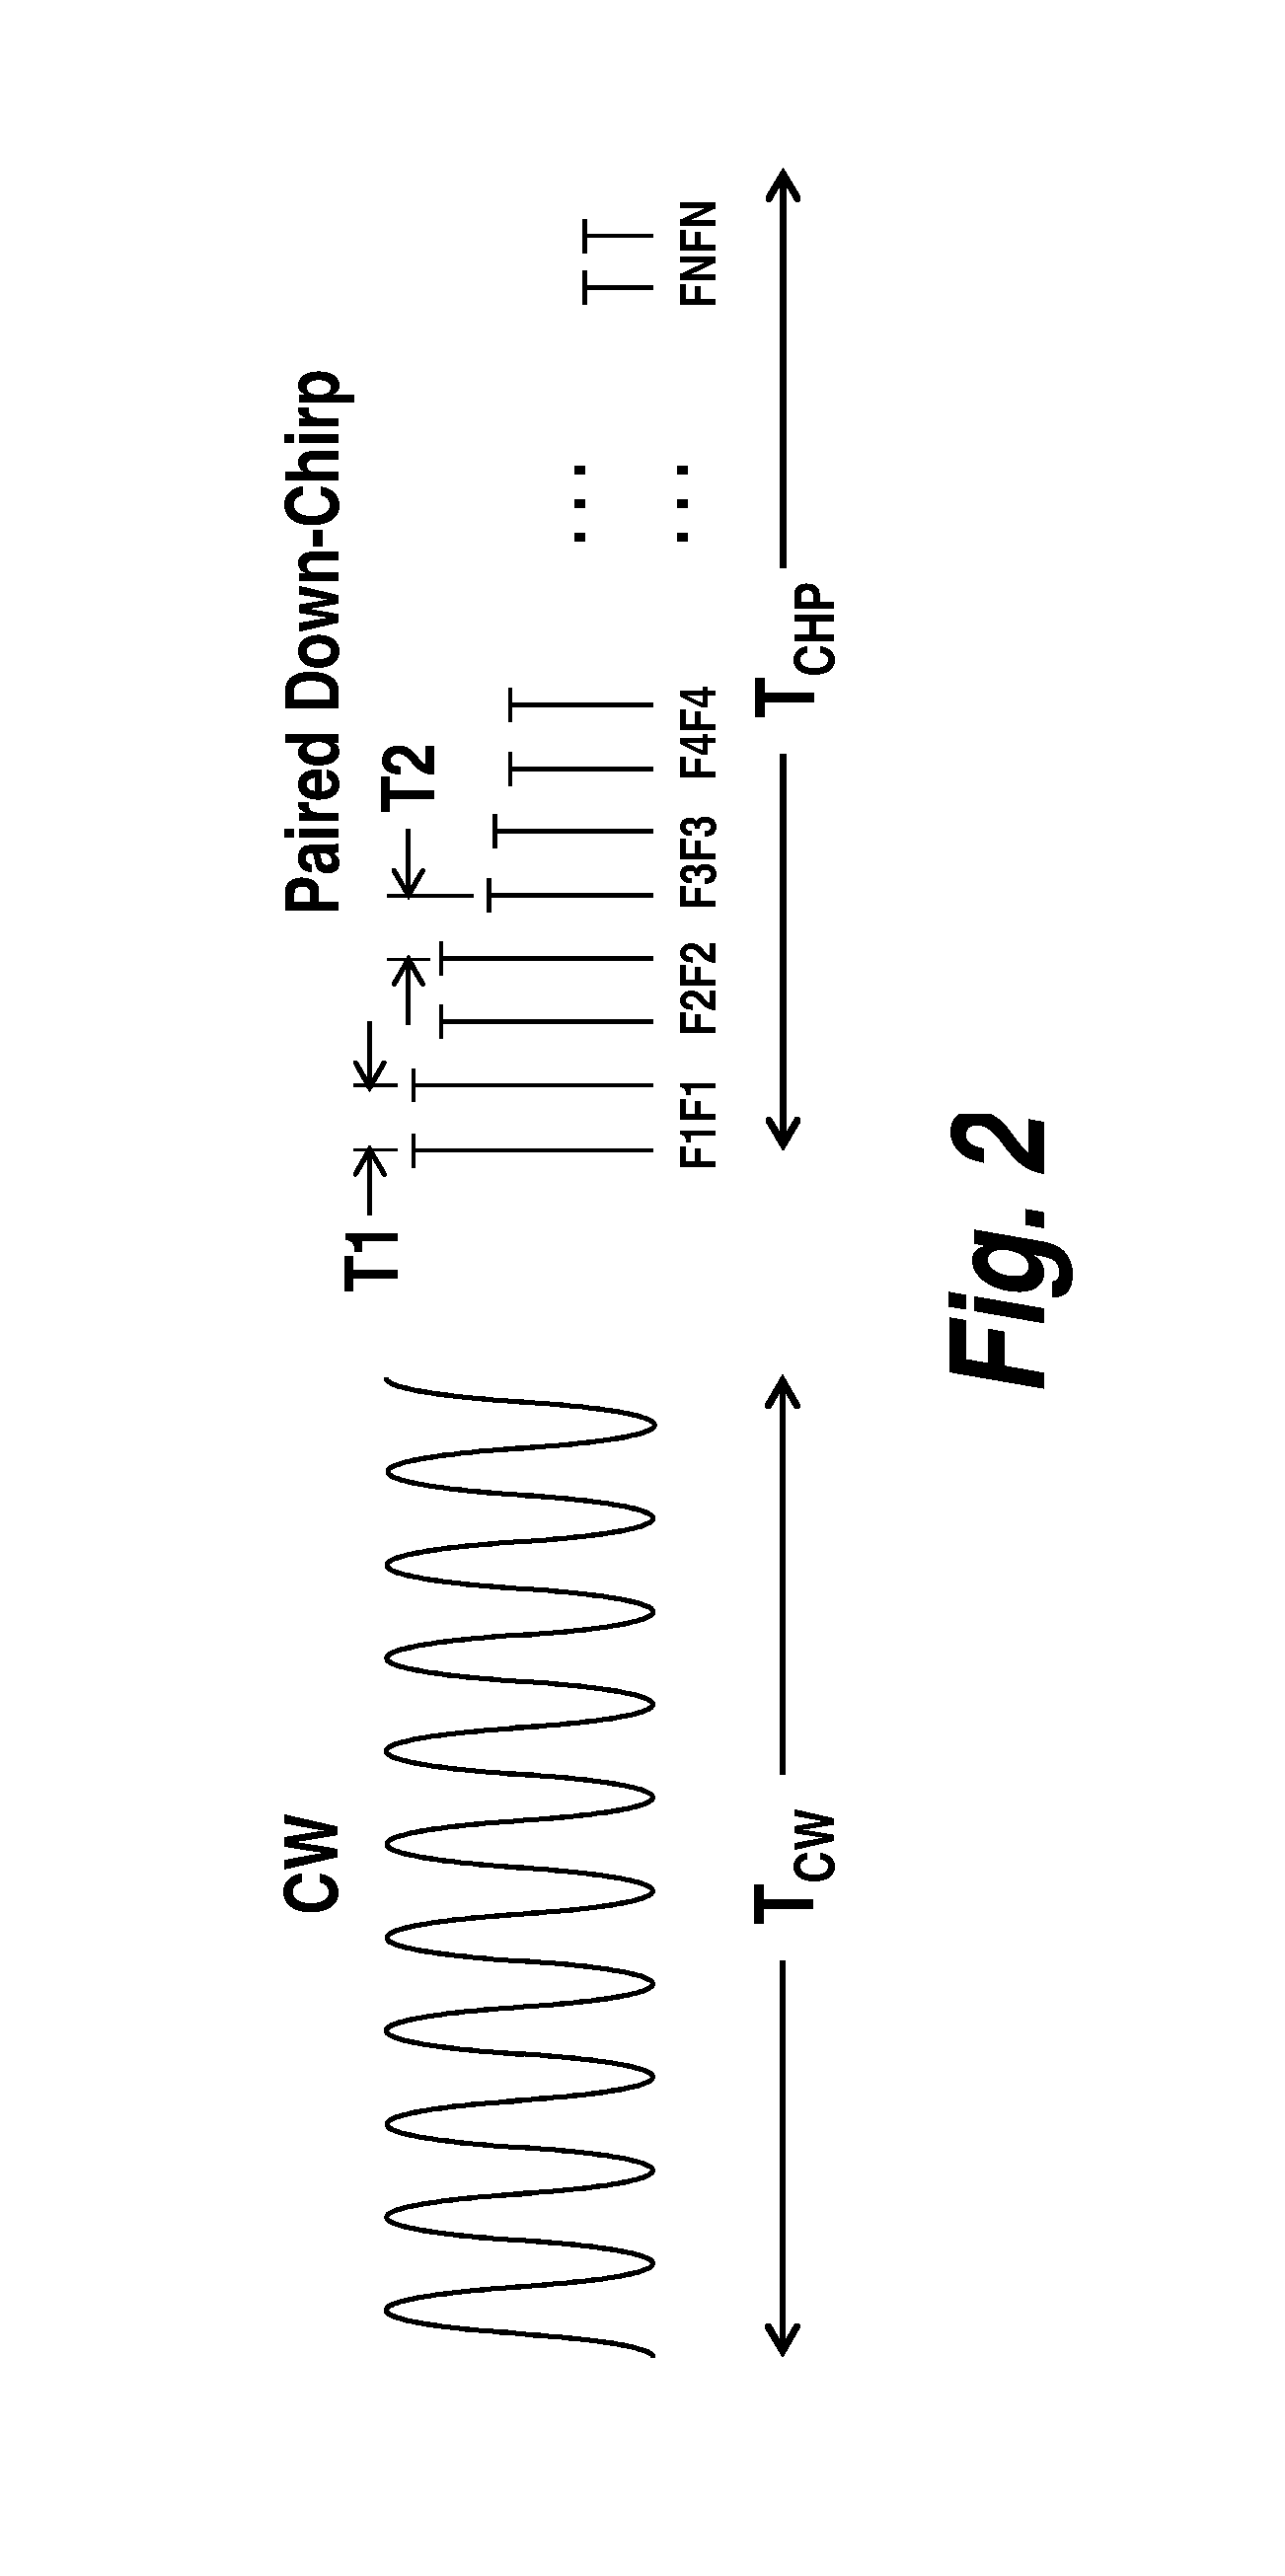 Radar system and method for determining range, relative velocity and bearing of an object using continuous-wave and chirp signals